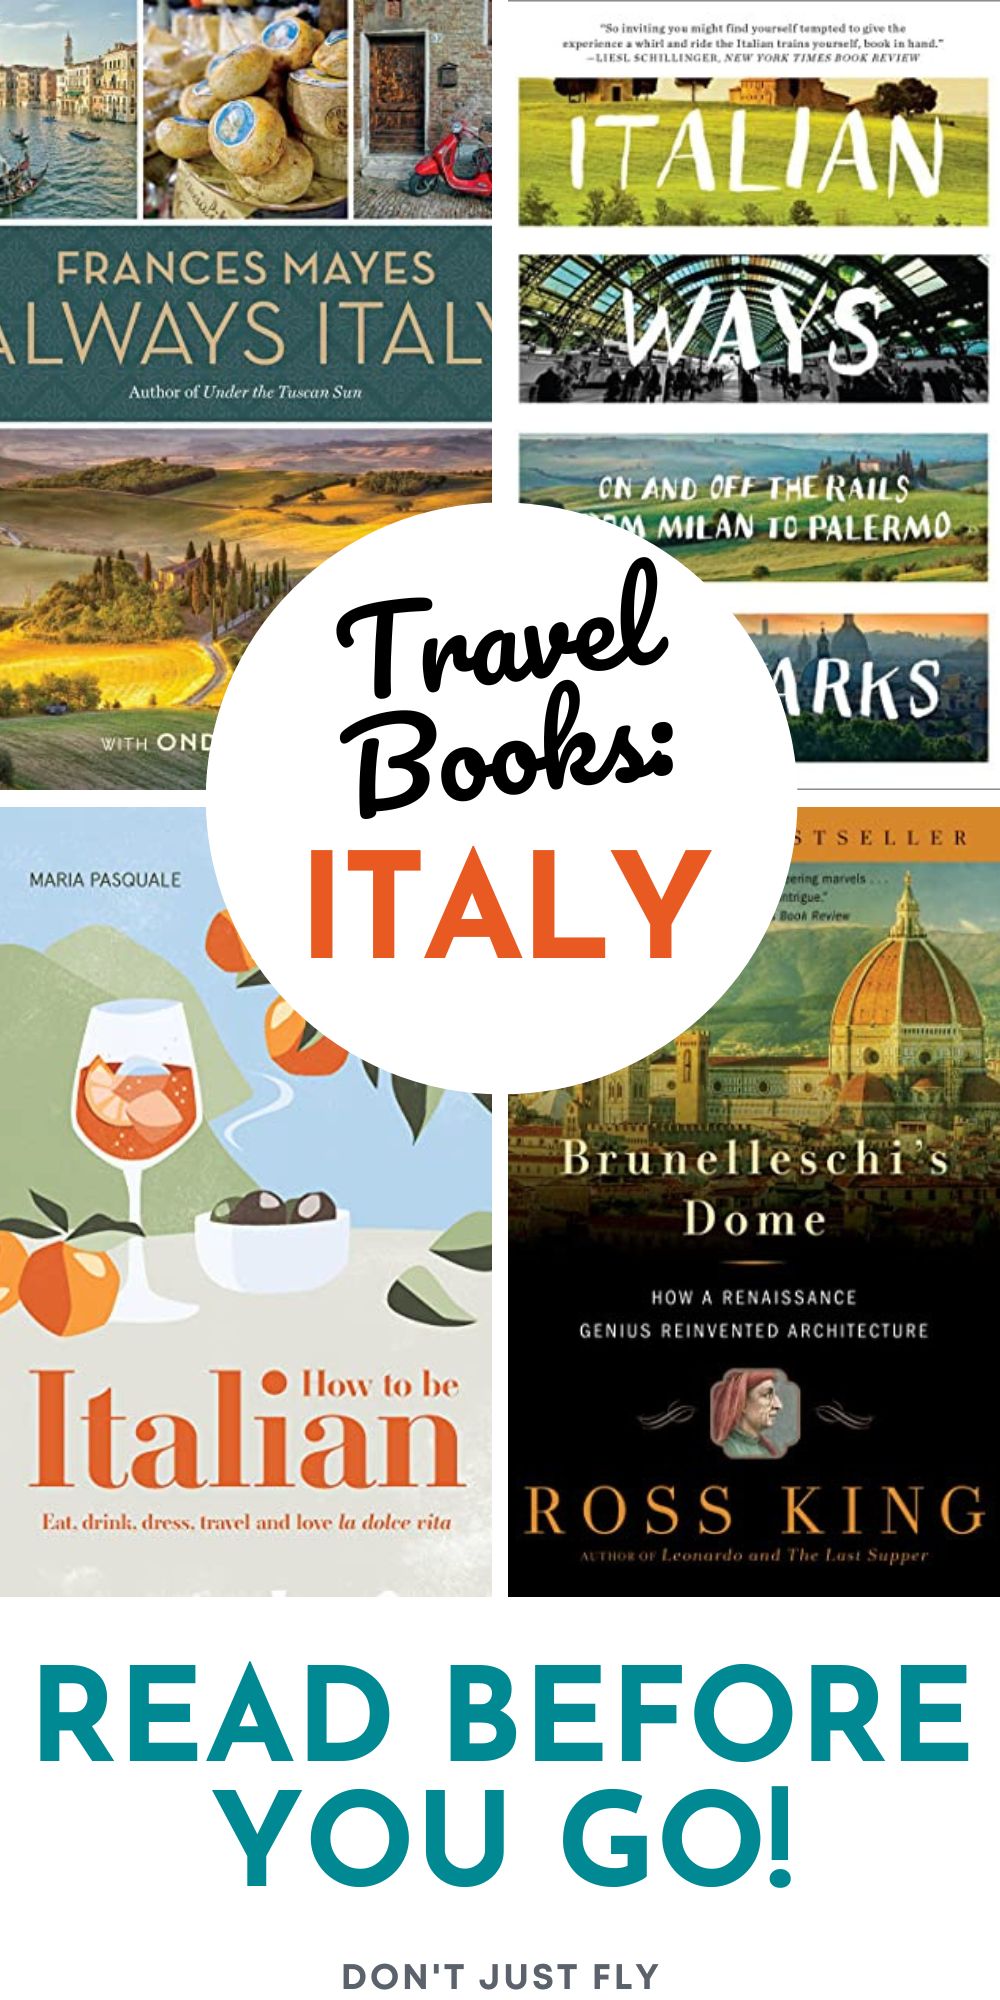 A photo collage shows the best books to read about Italy before a trip.